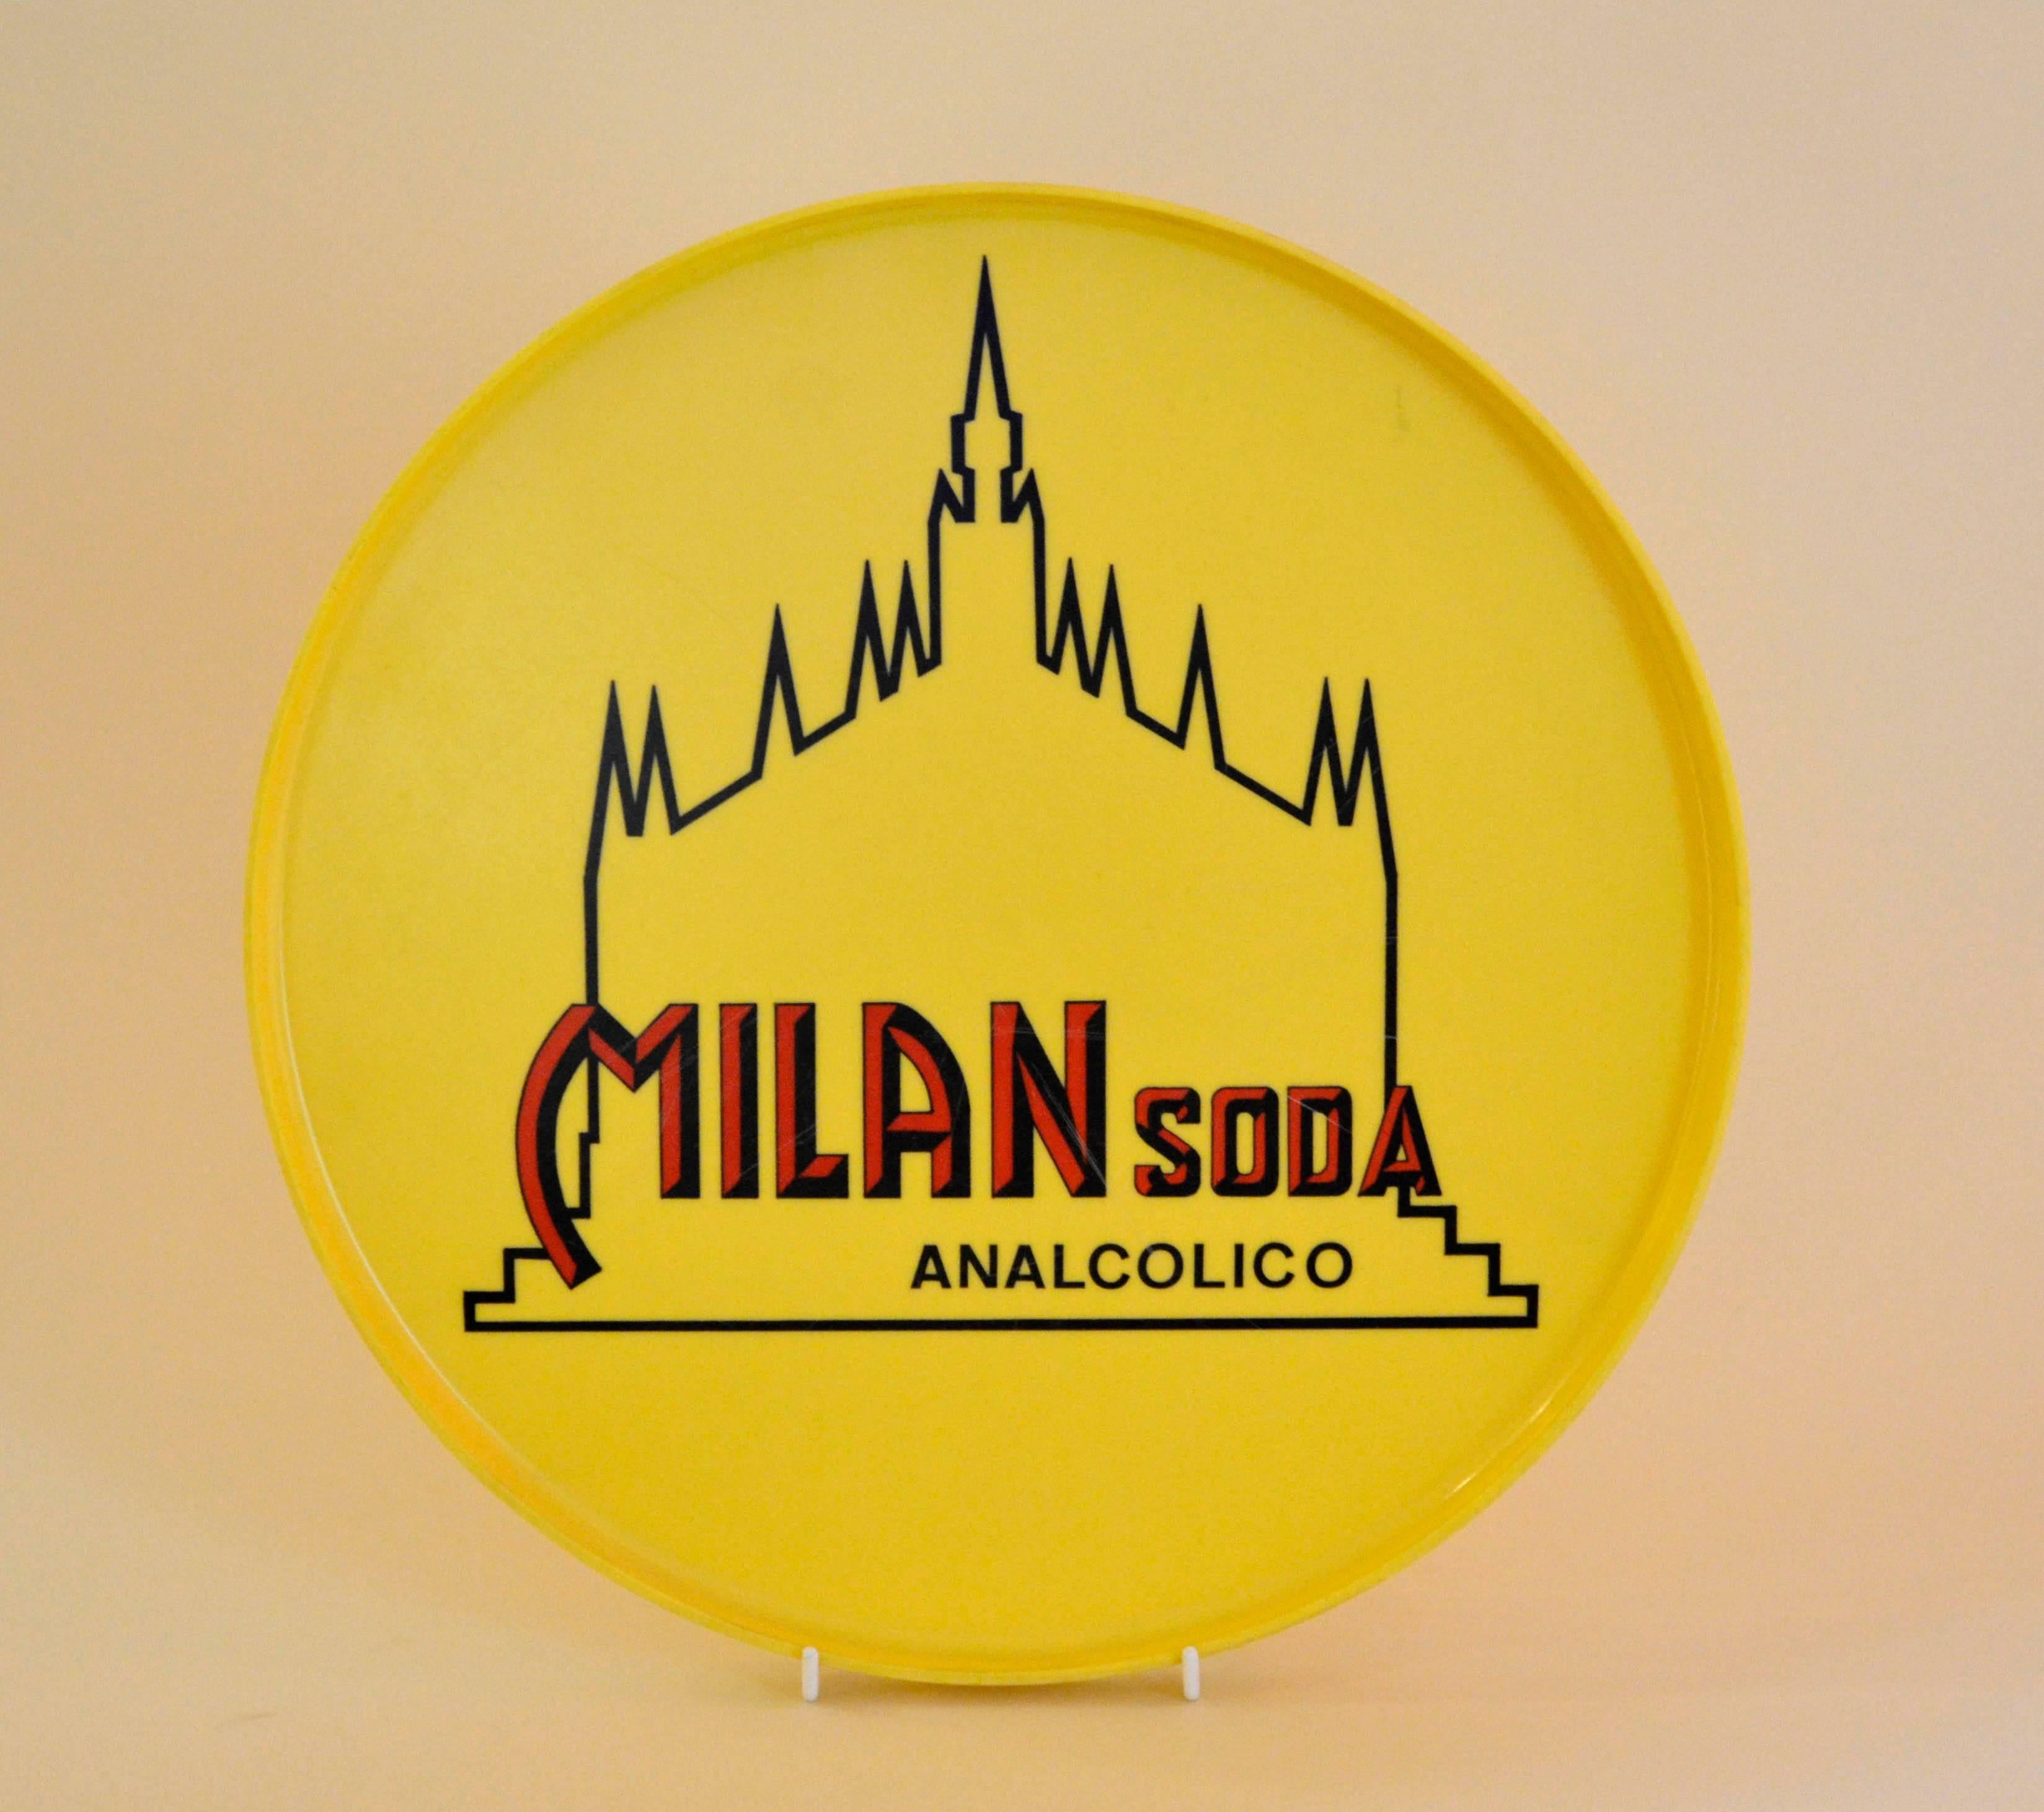 1960s Yellow Round Plastic Tray Milan Soda Analcolico Made in Italy For Sale 1